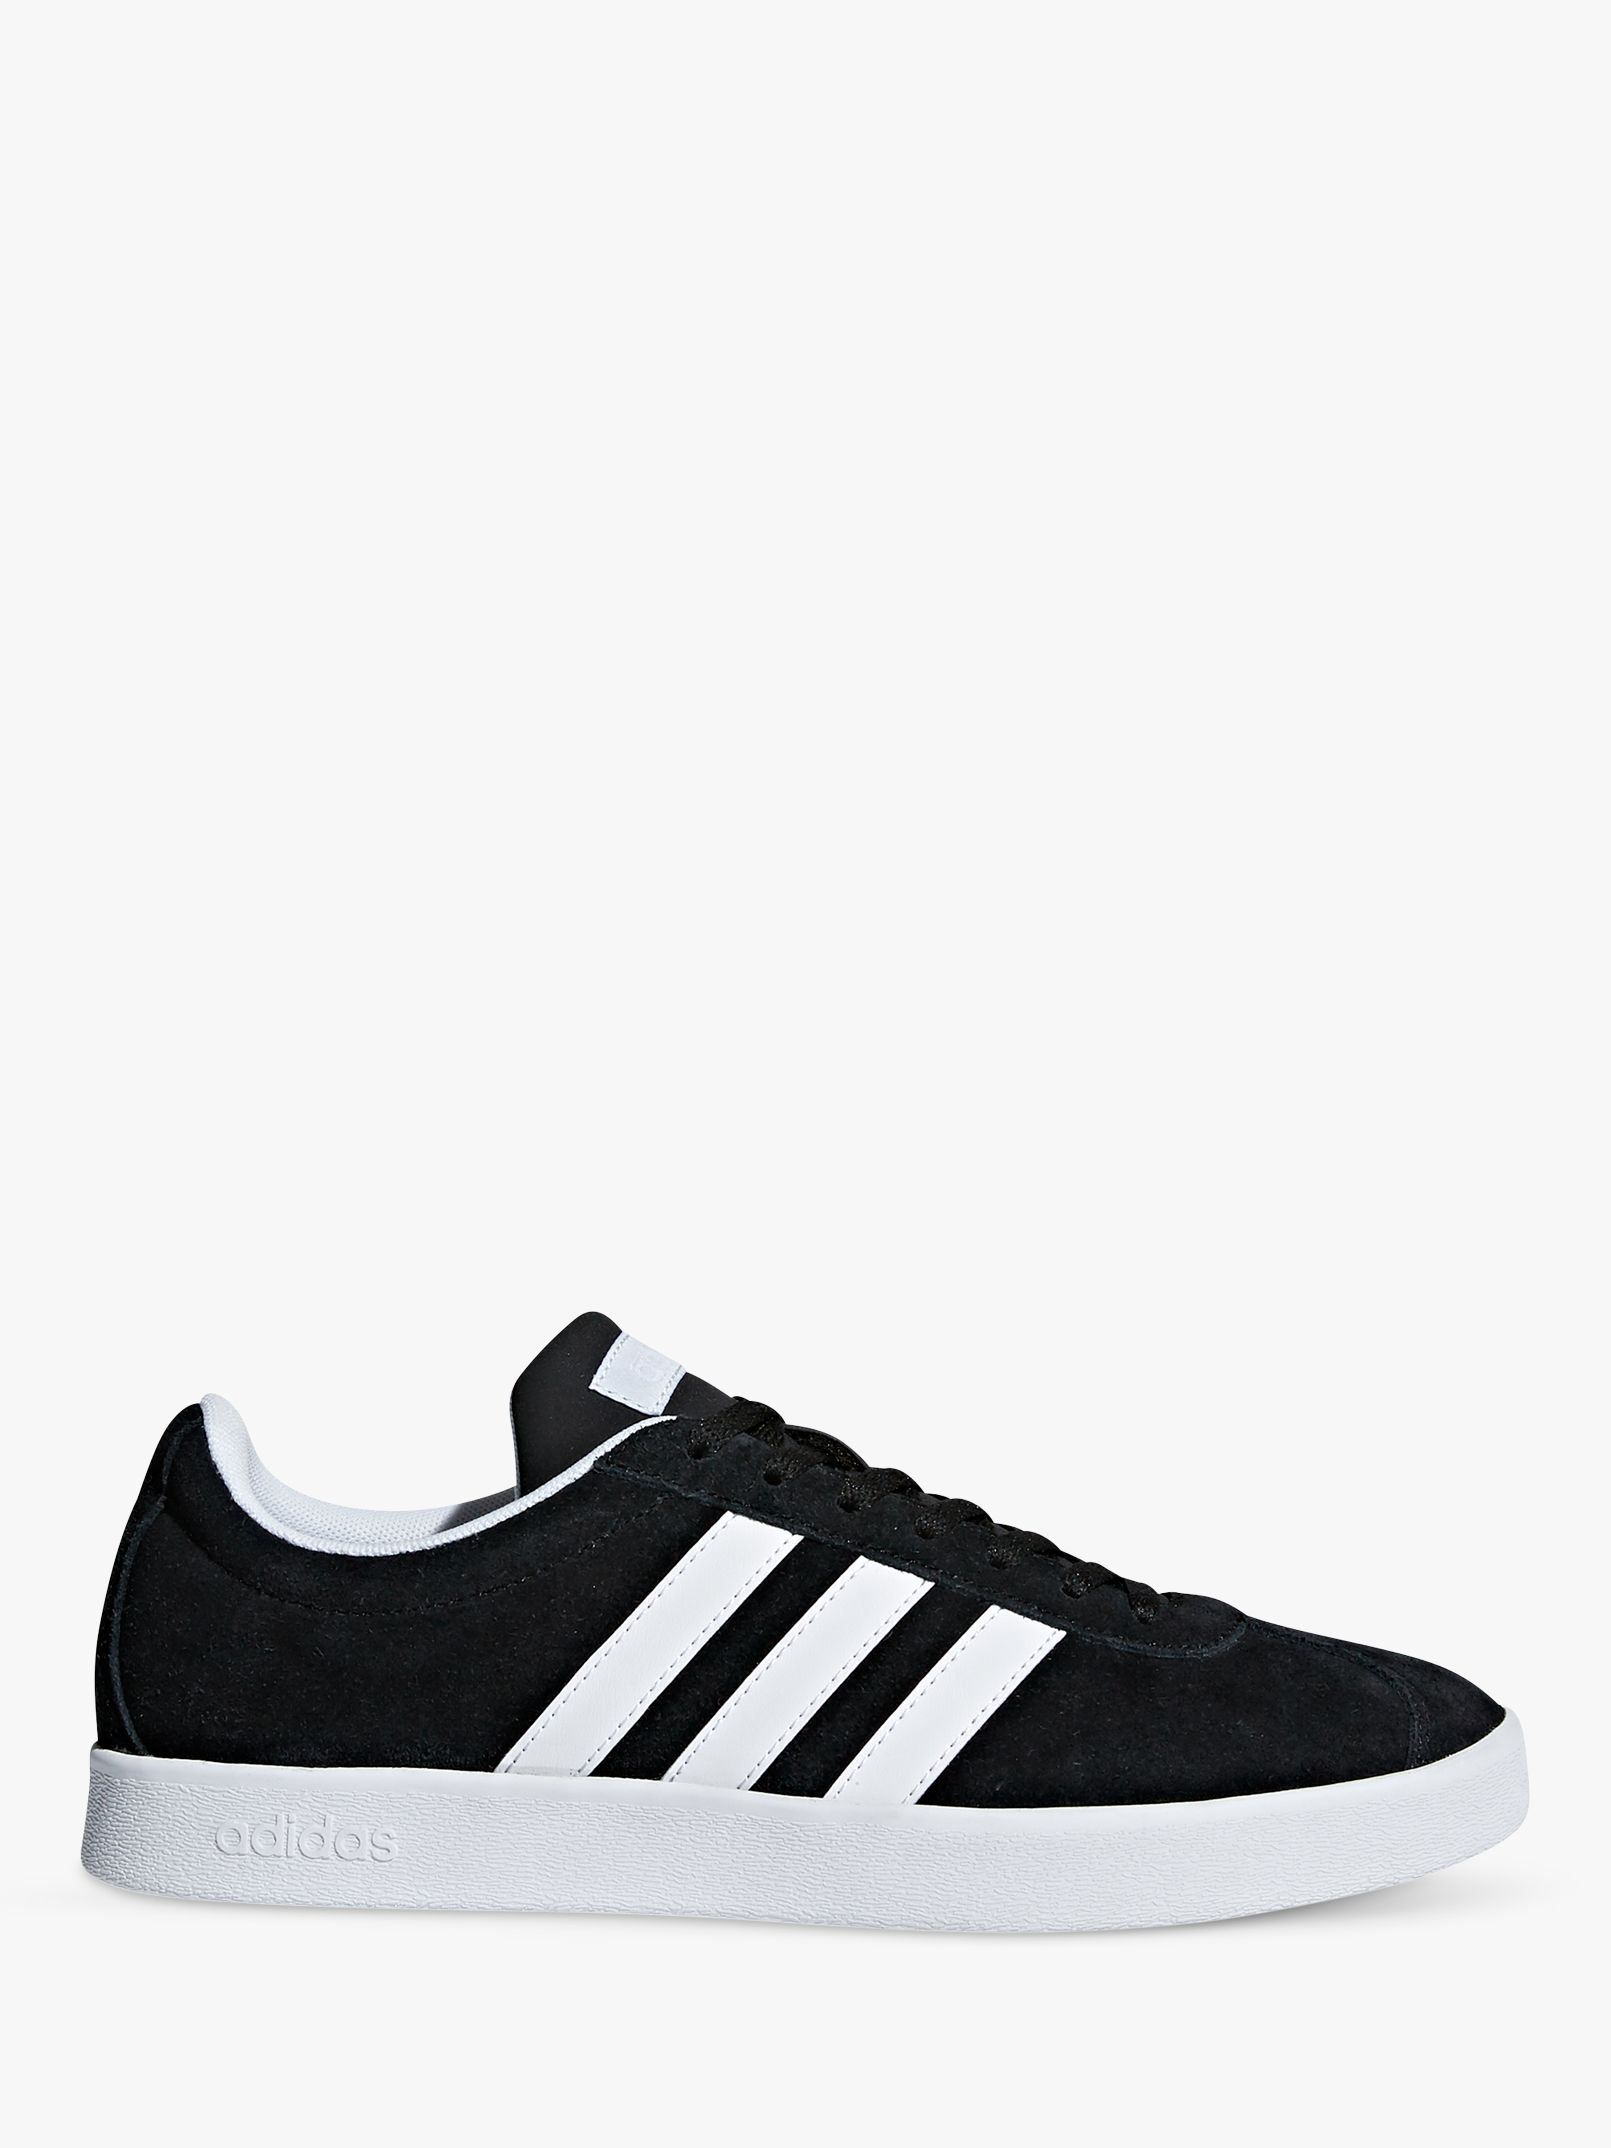 womans black adidas trainers